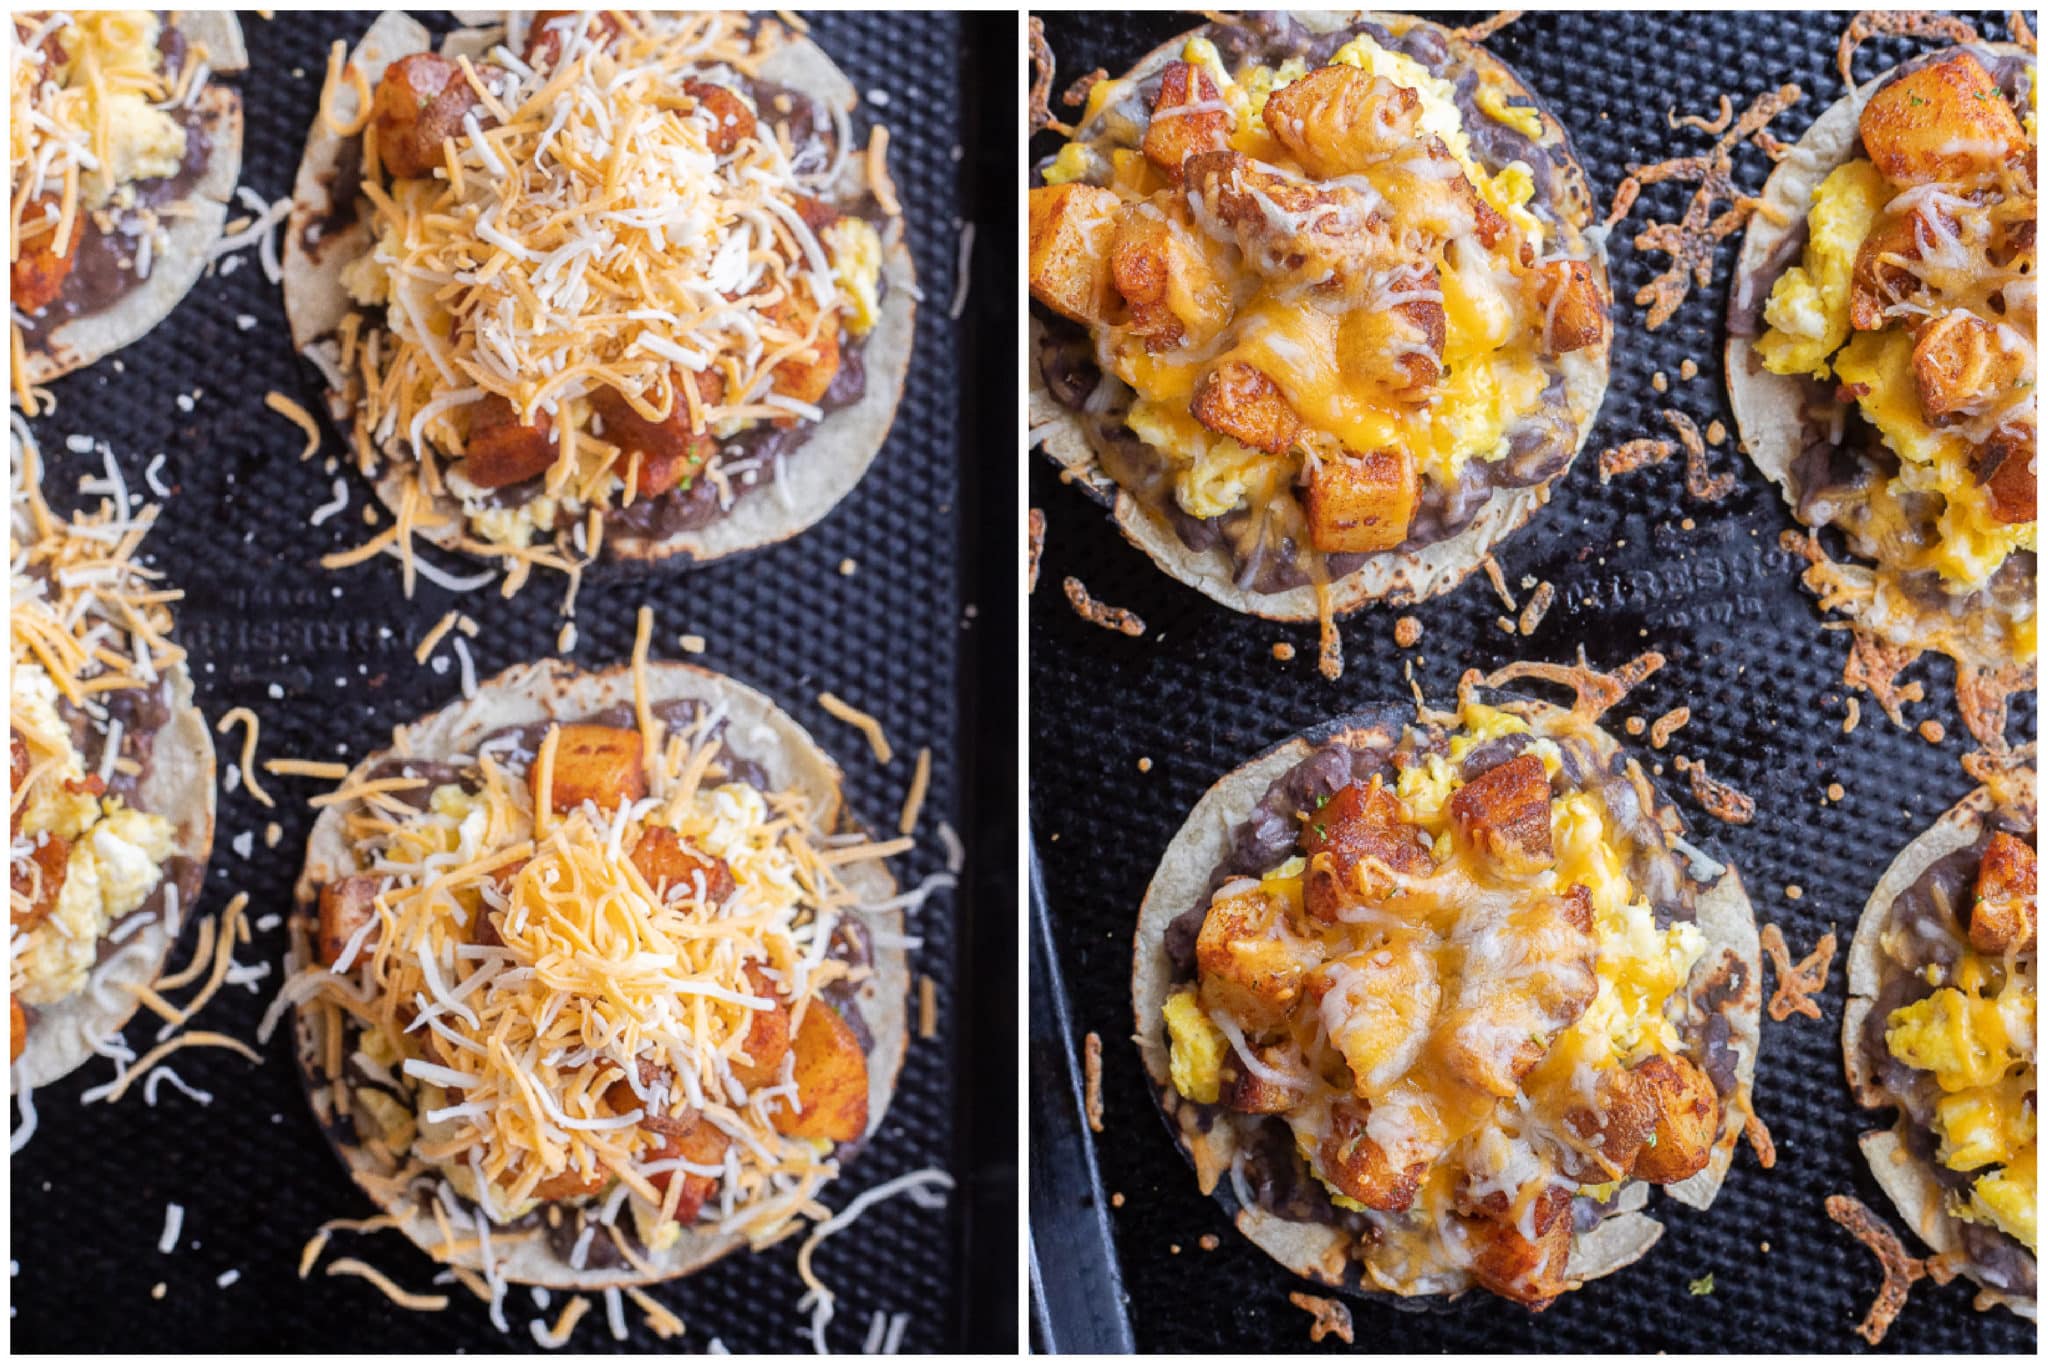 potato egg and cheese breakfast tacos before and after they have been baked